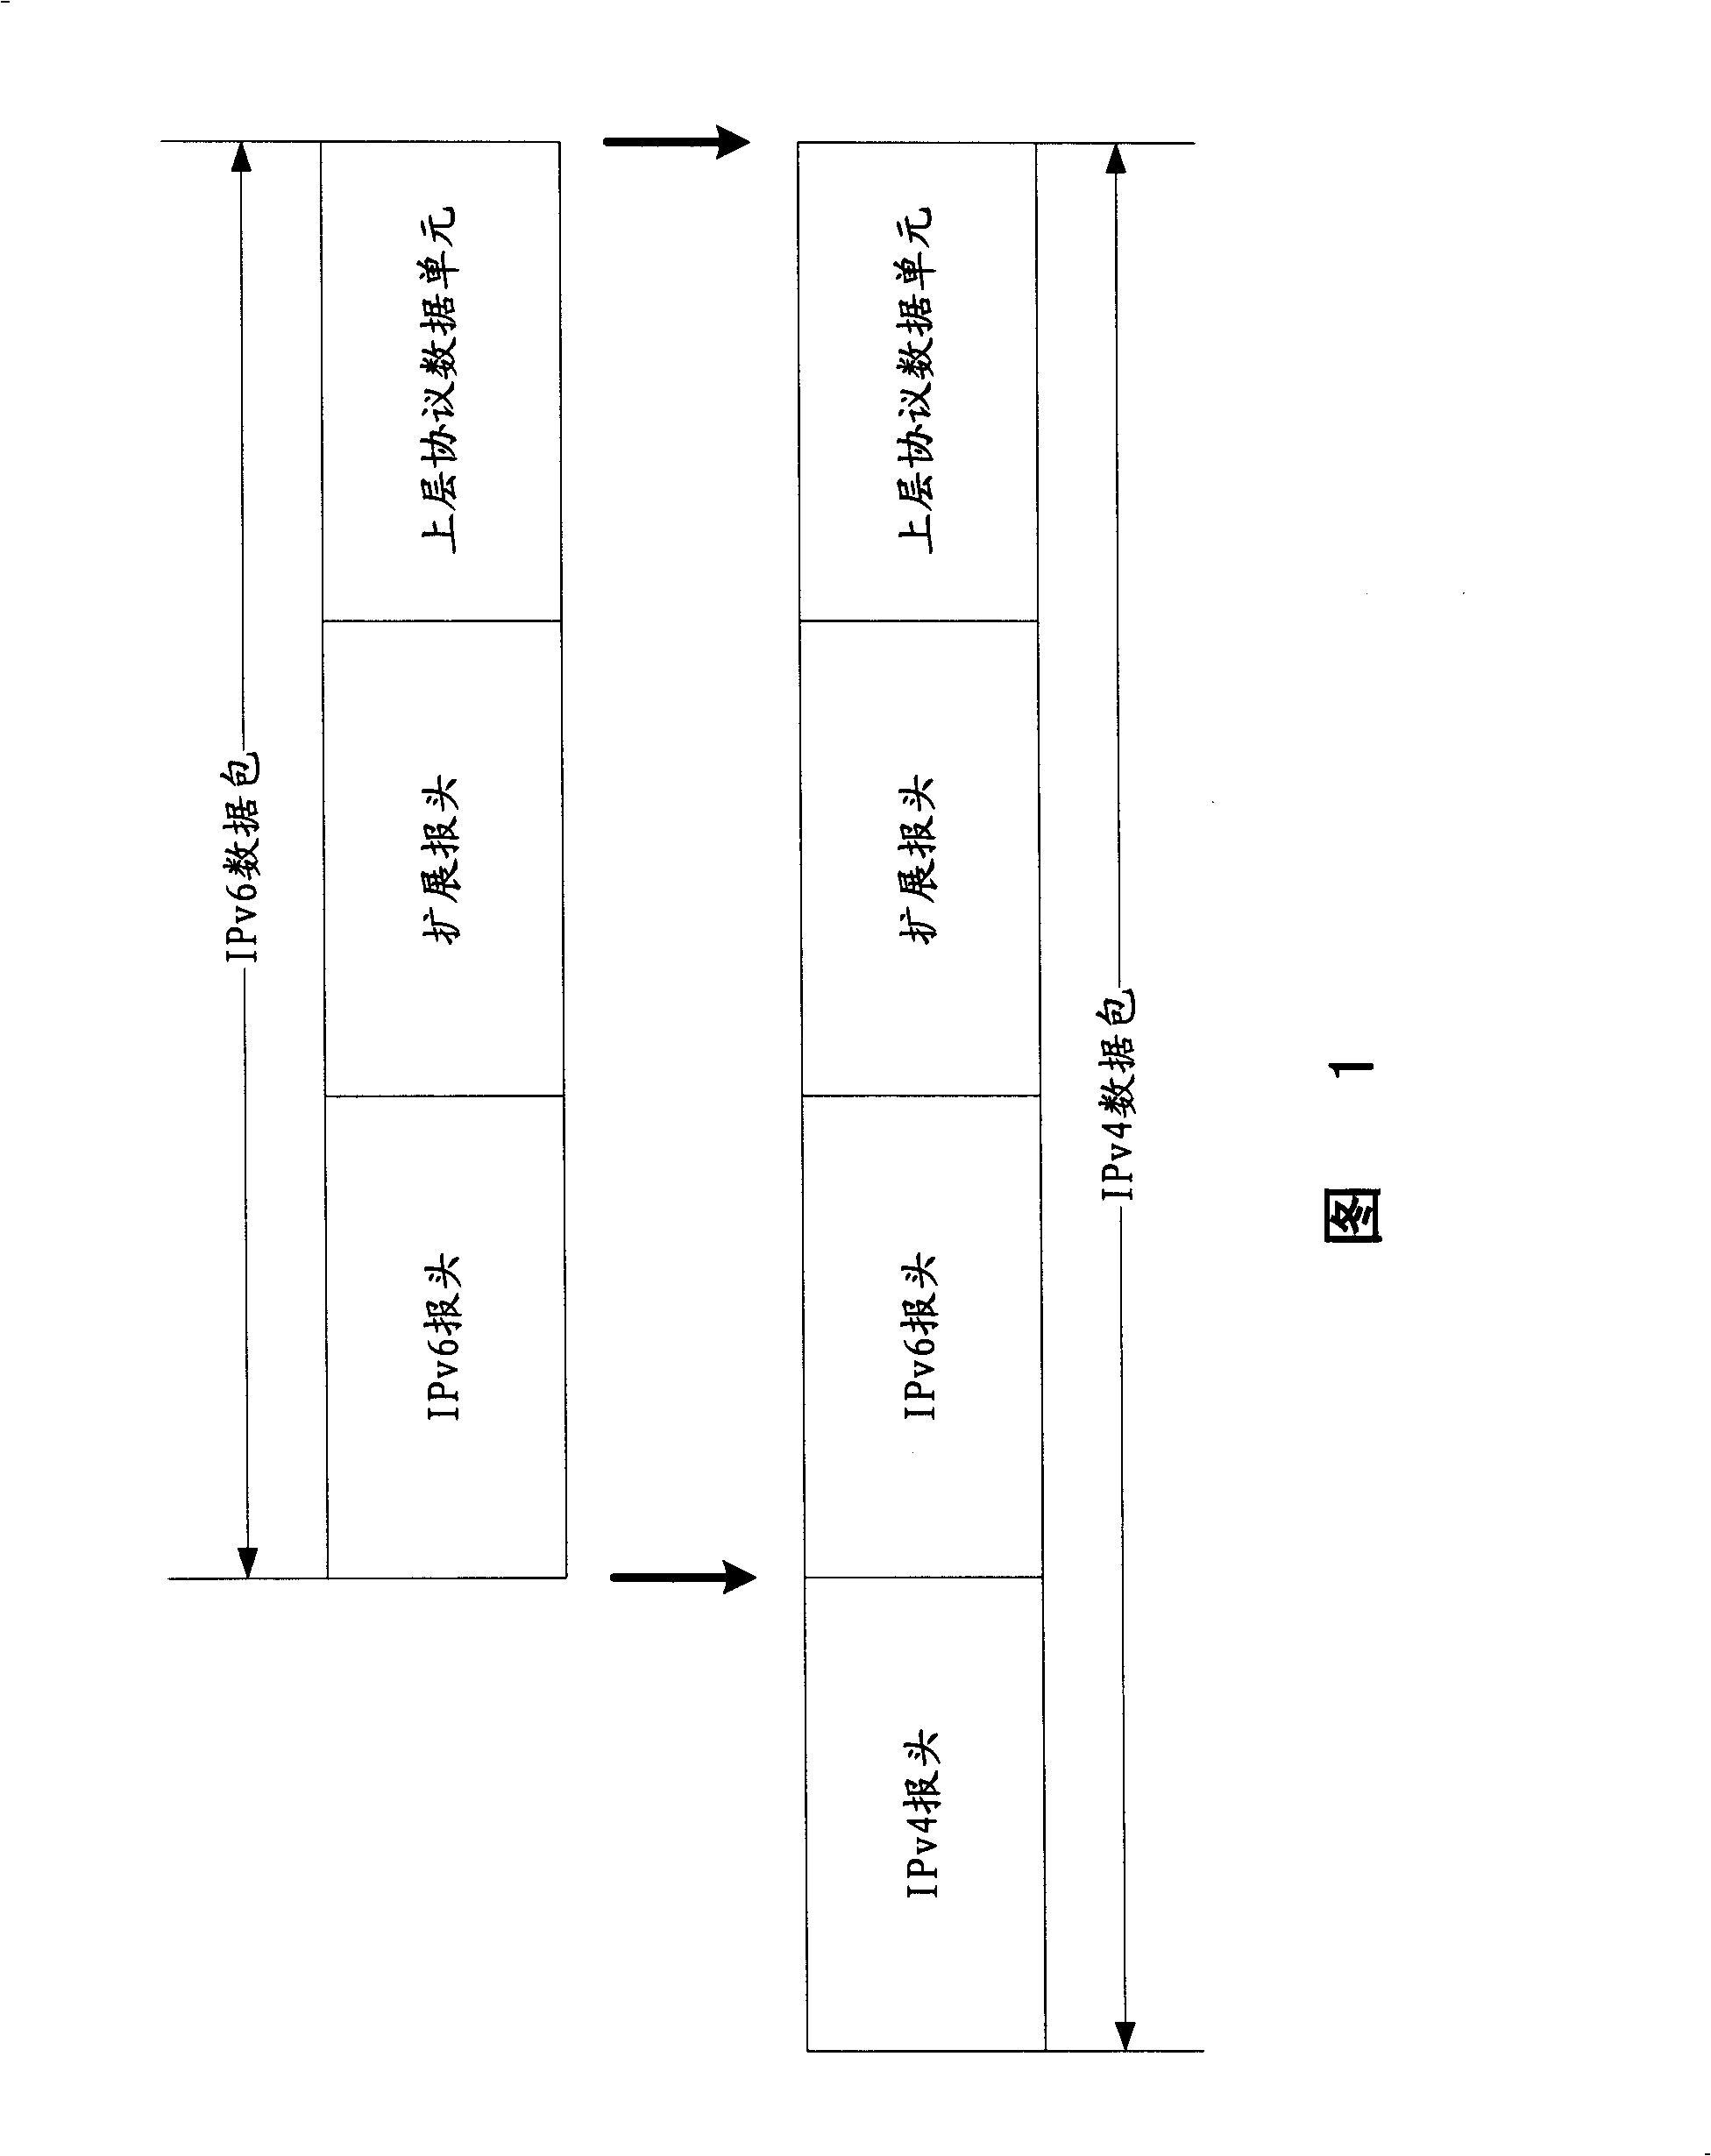 Tunnel packet processing method for implementing IPv6 traversing IPv4 based on network processor